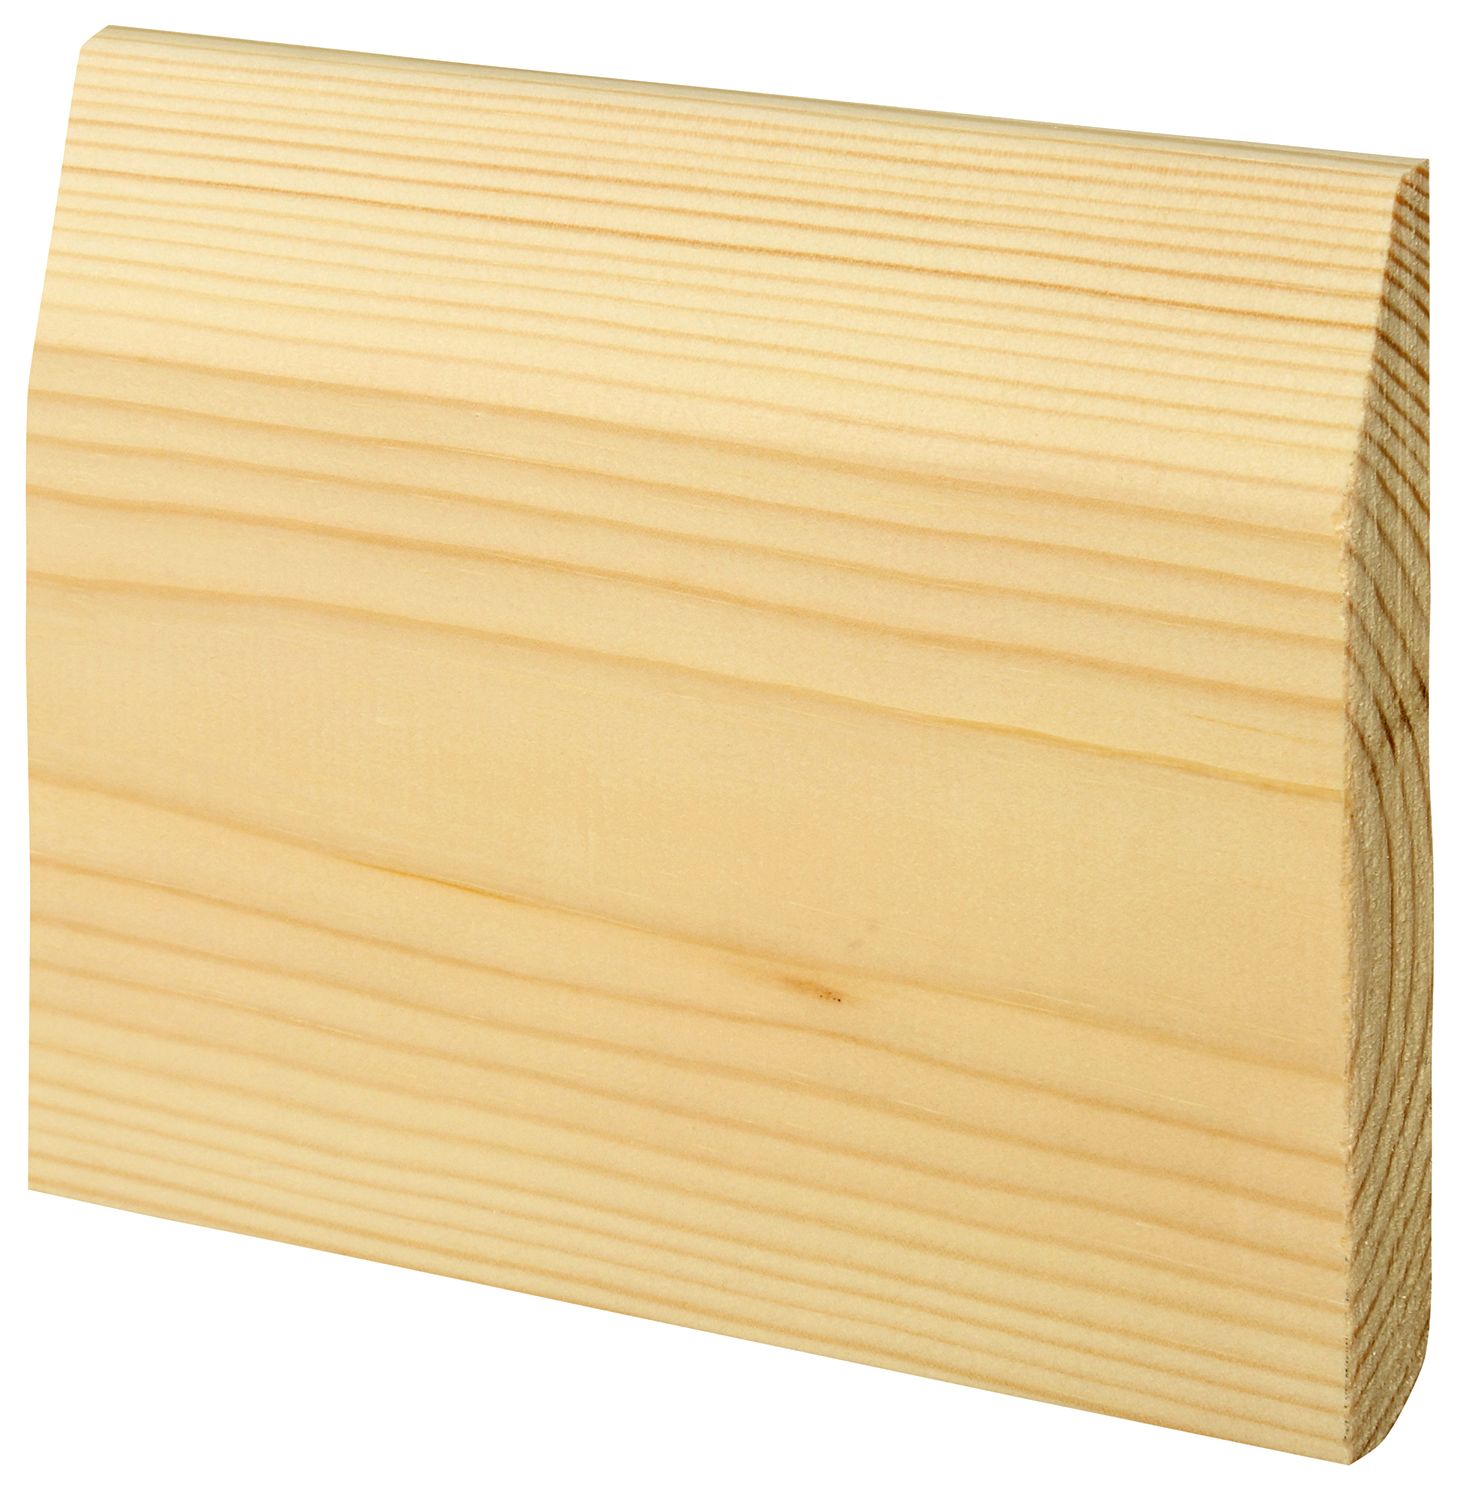 Image of Wickes Dual Purpose Chamfered/Bullnose Pine Skirting - 19 x 119 x 3600mm